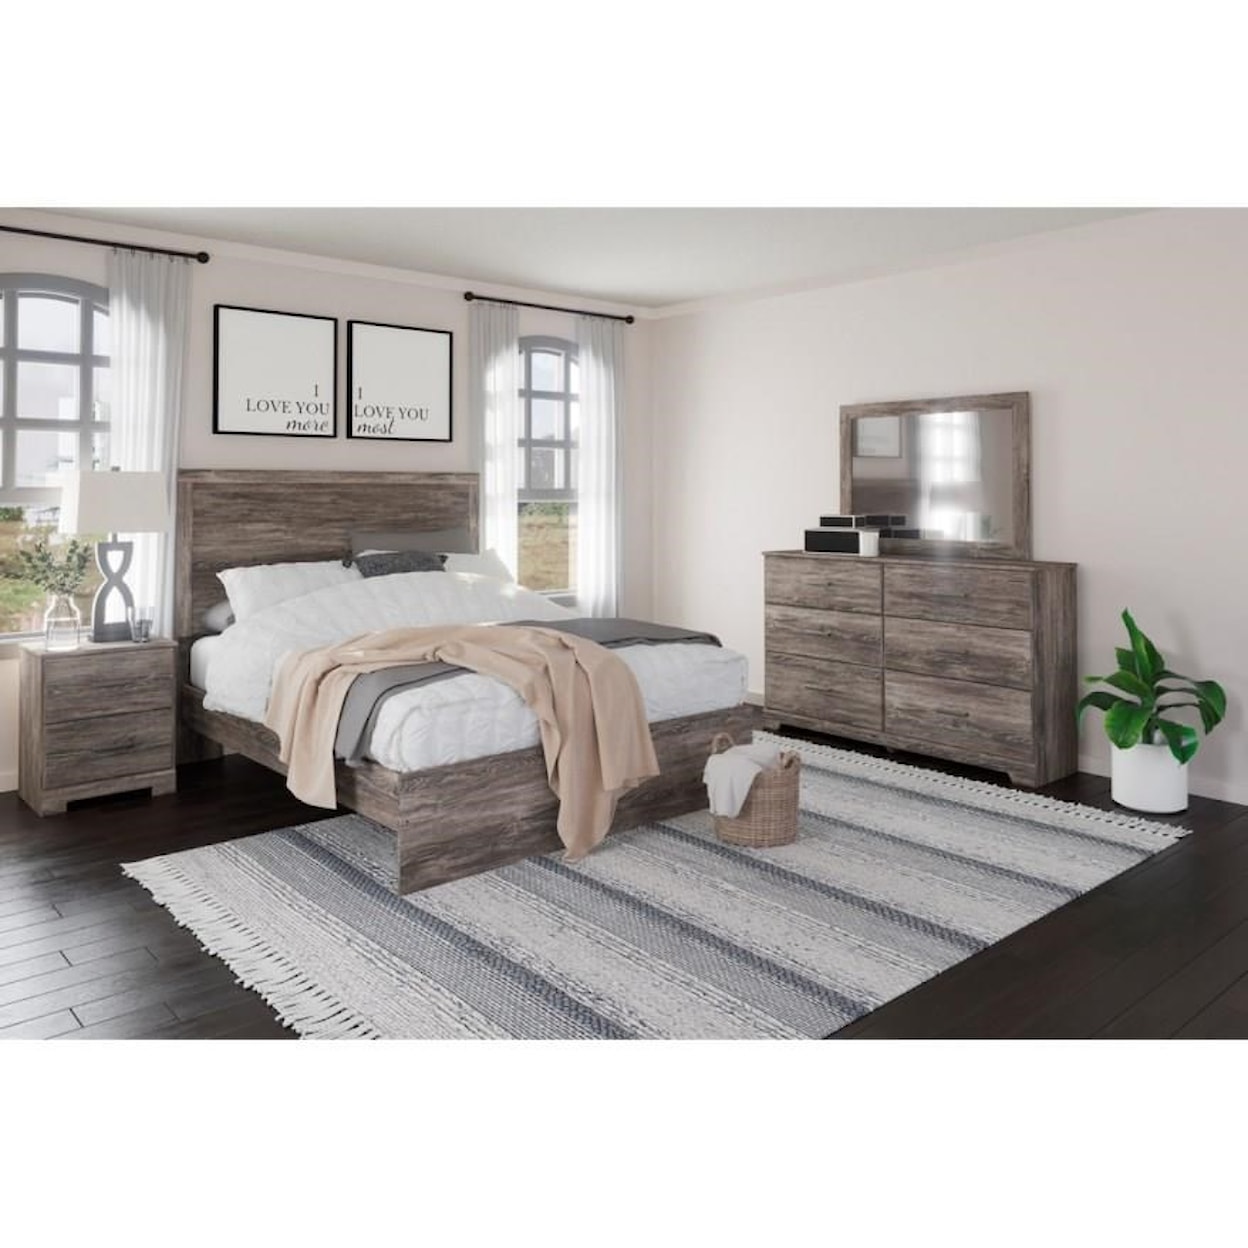 Signature Design by Ashley Ralinski 5pc Queen Bedroom Group